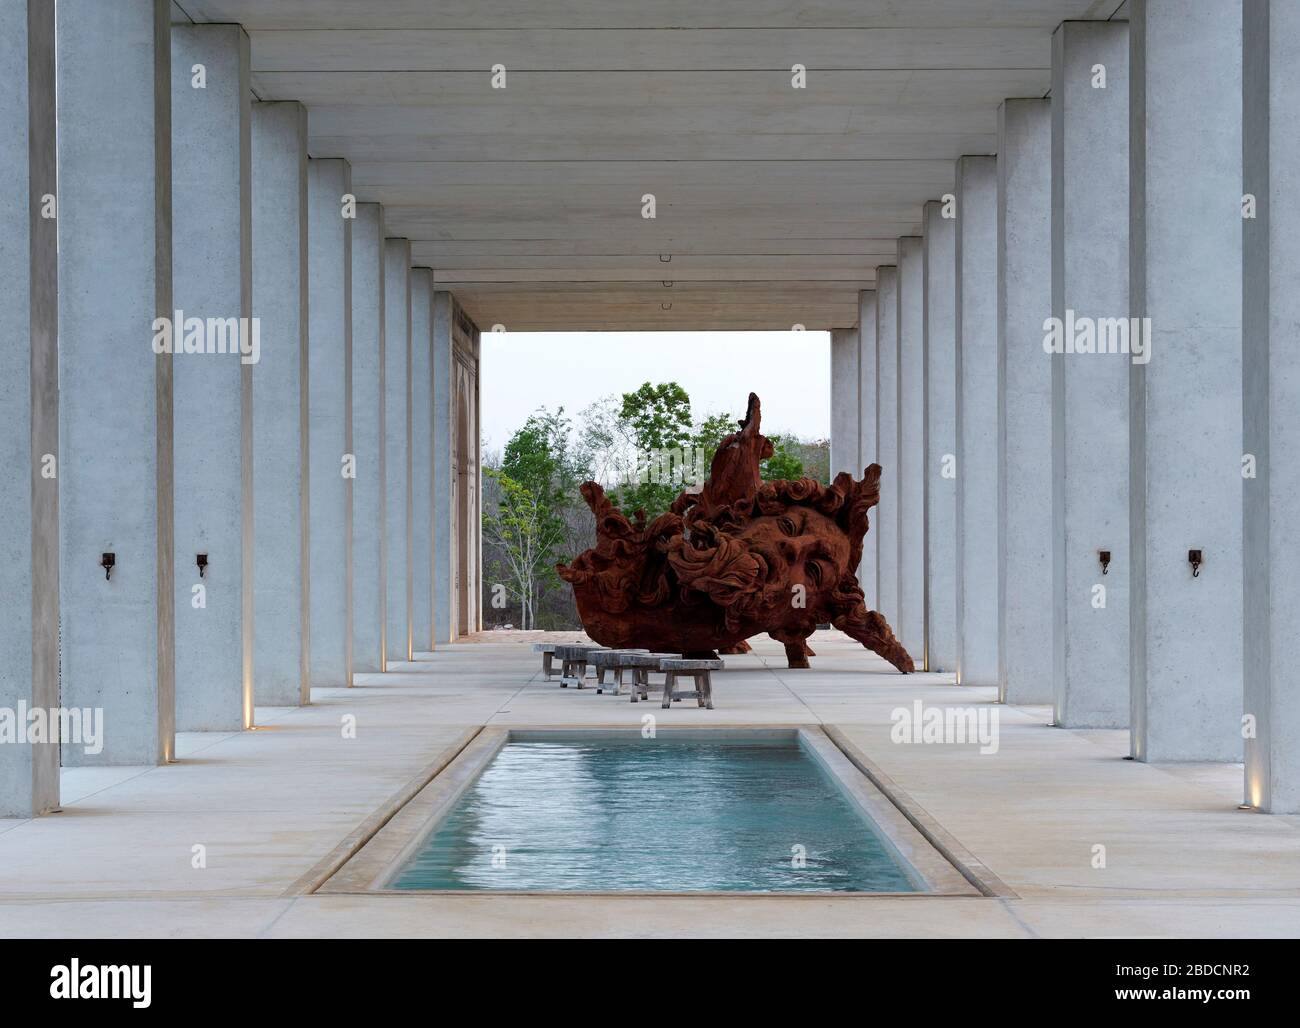 Colonnade with open air pool hall and  large sculpture beyond. Plantel Matilde, Yucatan, Mexico. Architect: Javier Marín and Arcadio Marín, 2020. Stock Photo